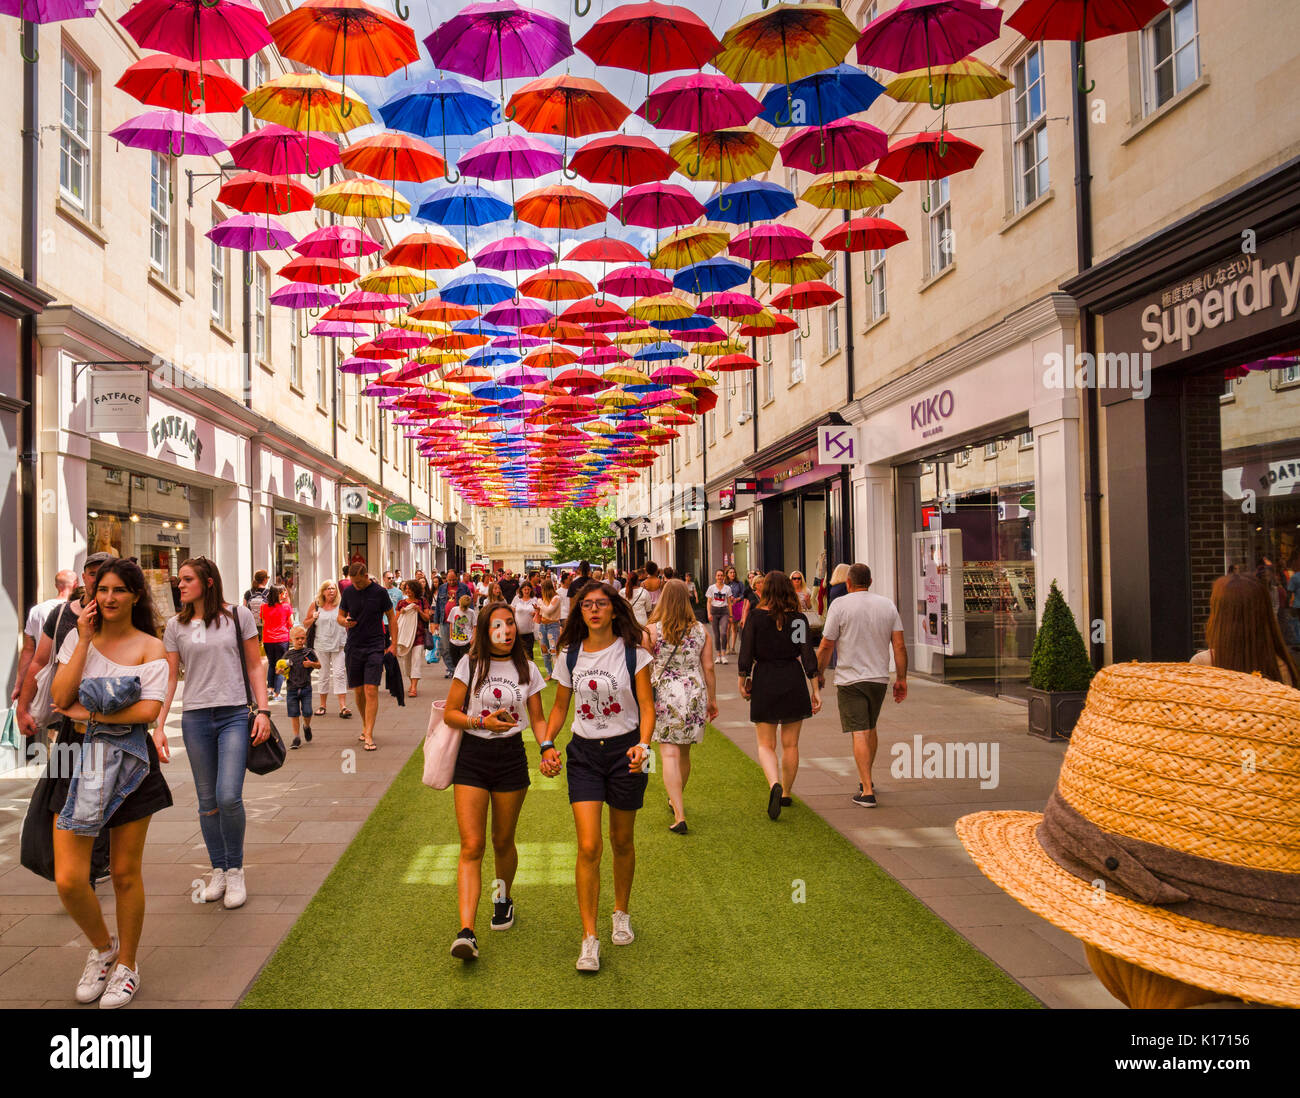 8 July 2017: Bath, Somerset, England, UK - Shopping in the SouthGate shopping centre. Above is the city's installation of 1000 umbrellas. Stock Photo